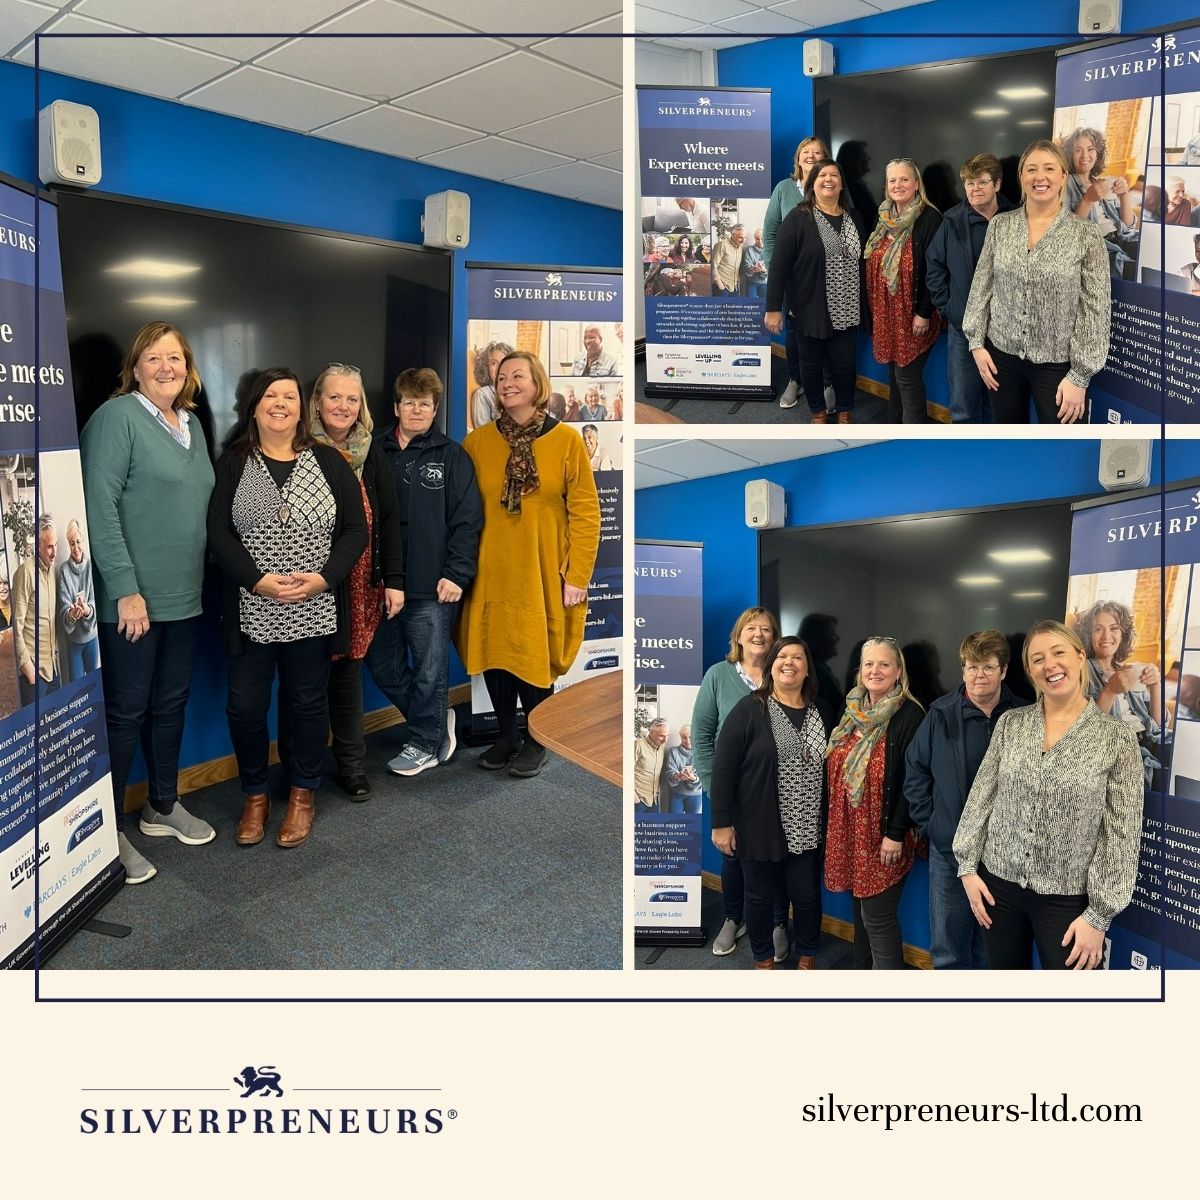 If you're interested in boosting your marketing strategy and developing your brand, then visit our website to find out more about our fully funded mentoring programme: silverpreneurs-ltd.com/apply-request-…

#UKSPF #Shropshire #InvestinShropshire #LevellingUp #FundedbyUKGovernment